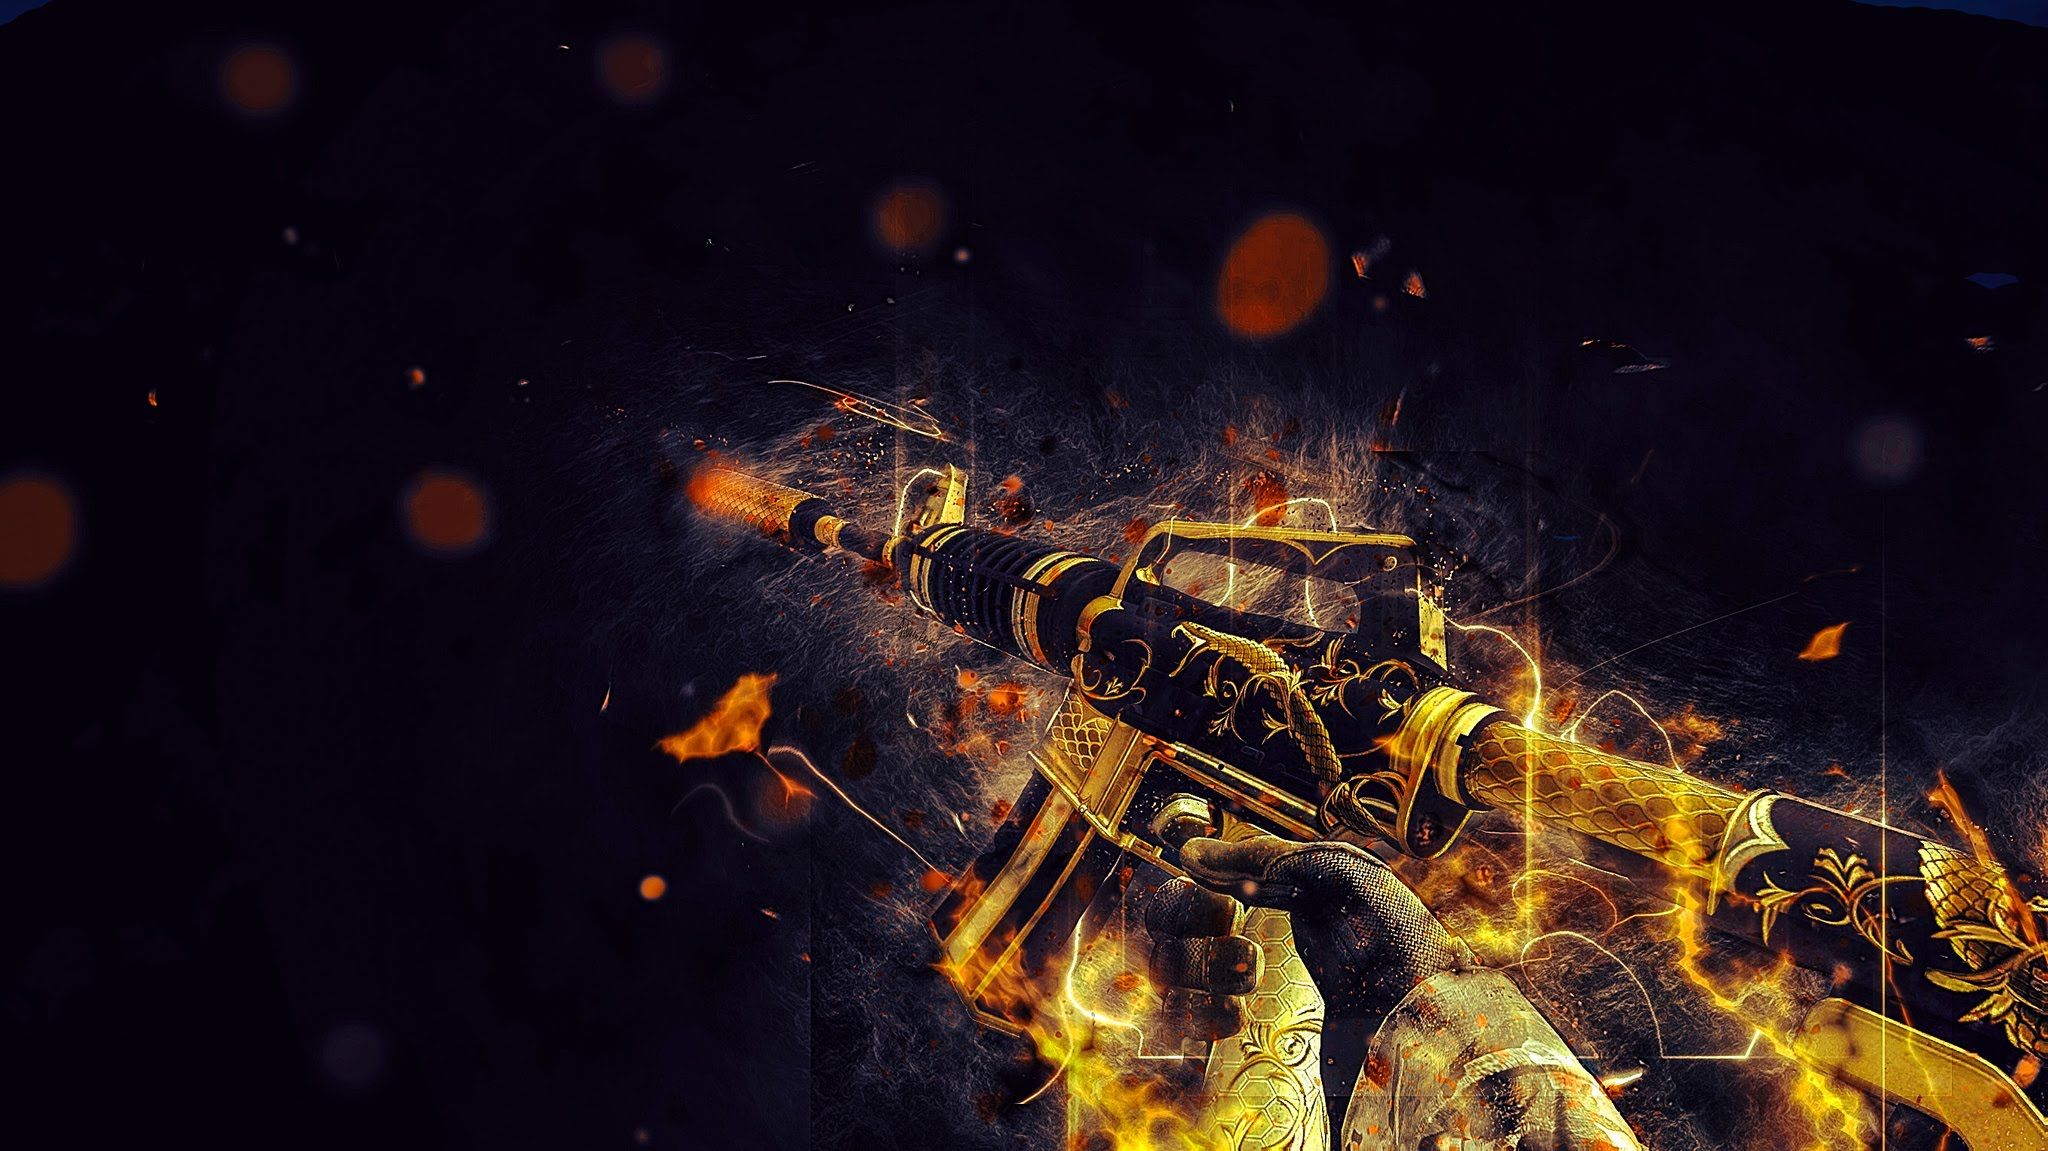 download Abyss Furnace cs go skin free